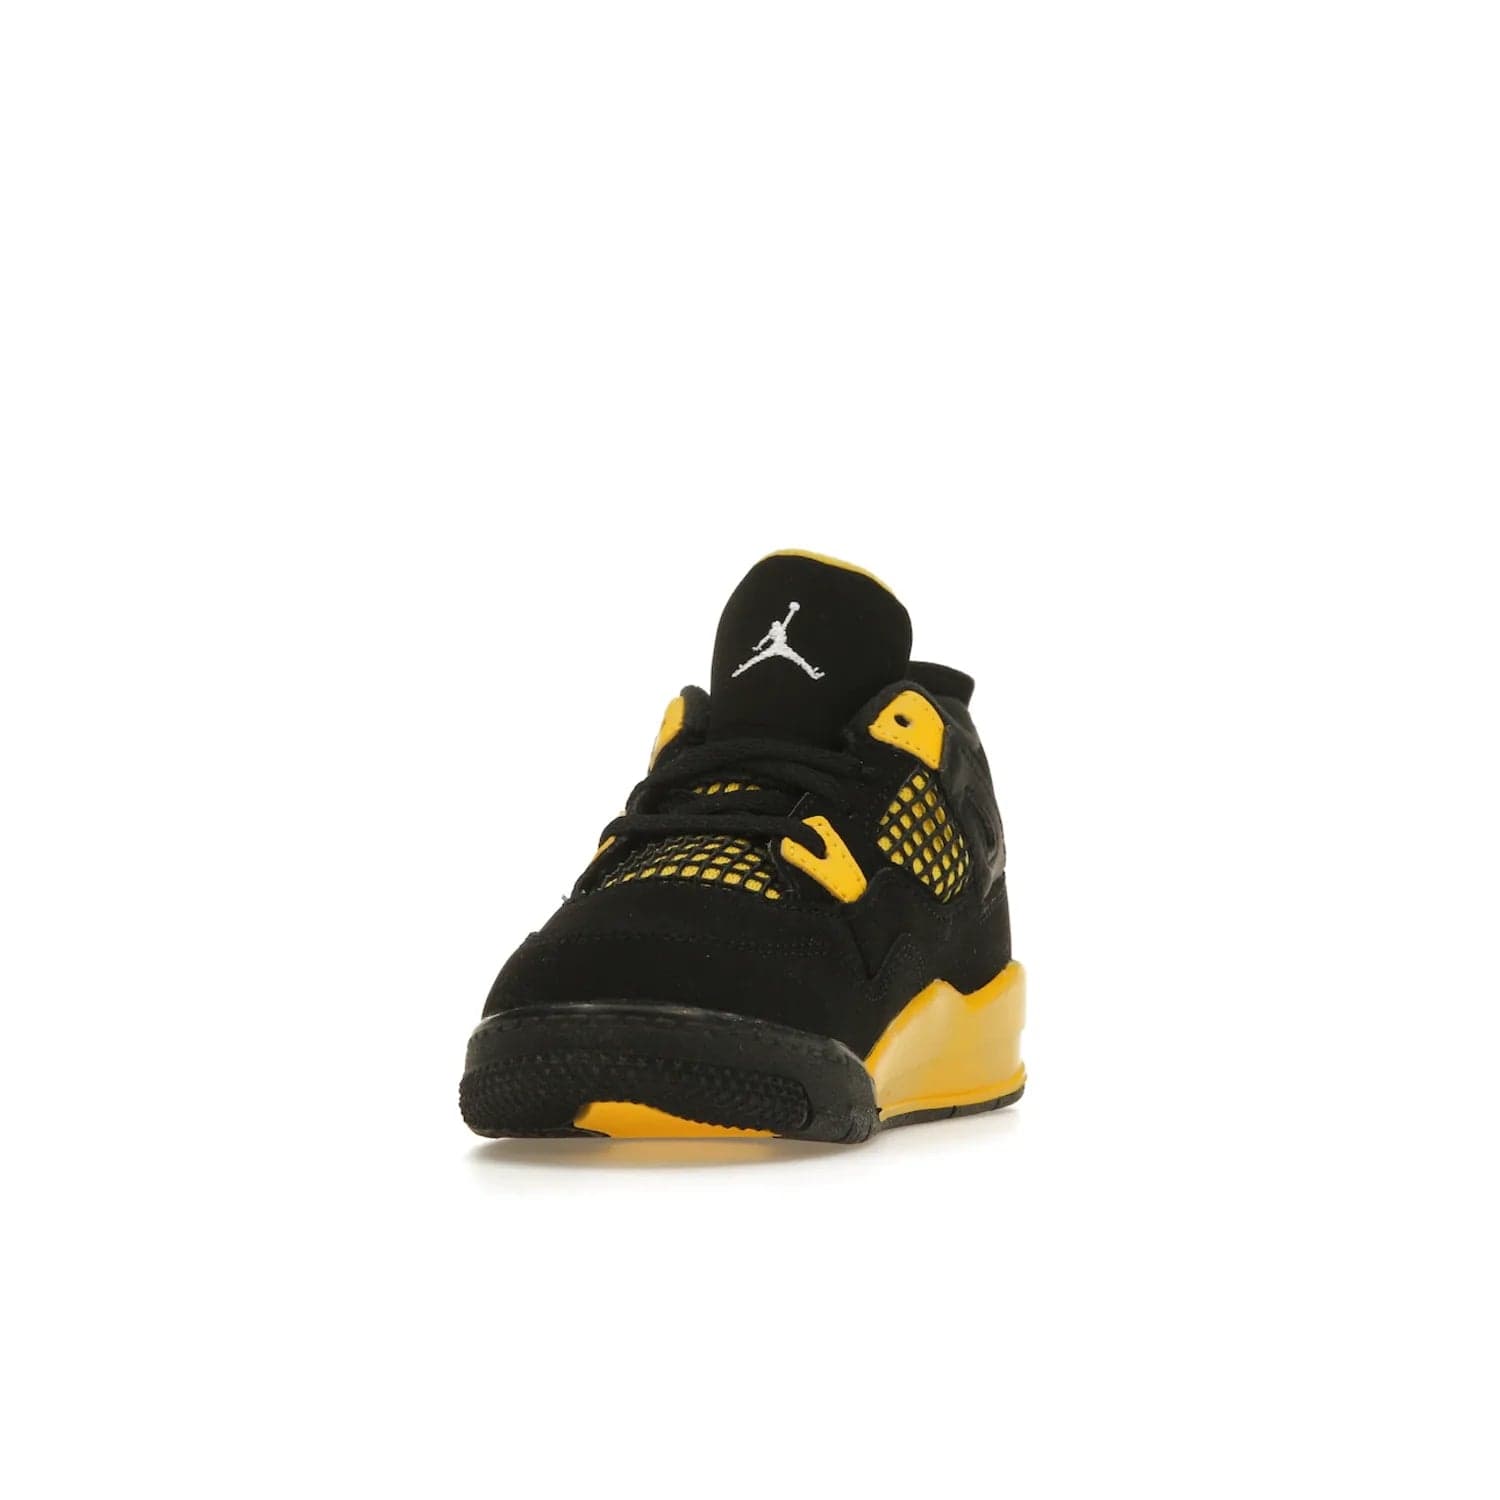 Jordan 4 Retro Thunder (2023) (TD) - Image 12 - Only at www.BallersClubKickz.com - Introducing the Jordan 4 Retro Thunder (2023) (TD): All-Black upper with Tour Yellow accents & Nike Air cushioning. Releasing in 2023.